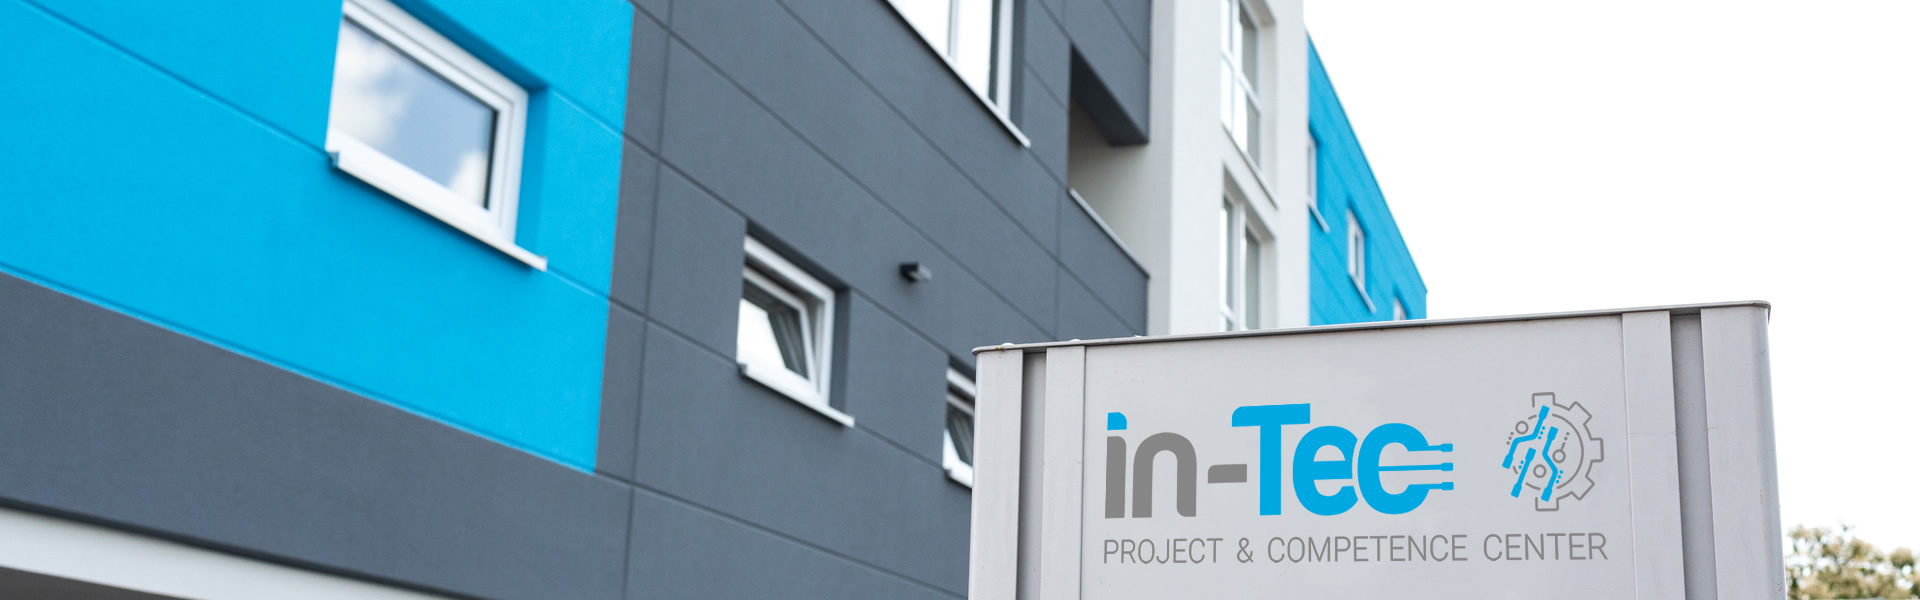 in-Tec Project & Competence Center - Imprint